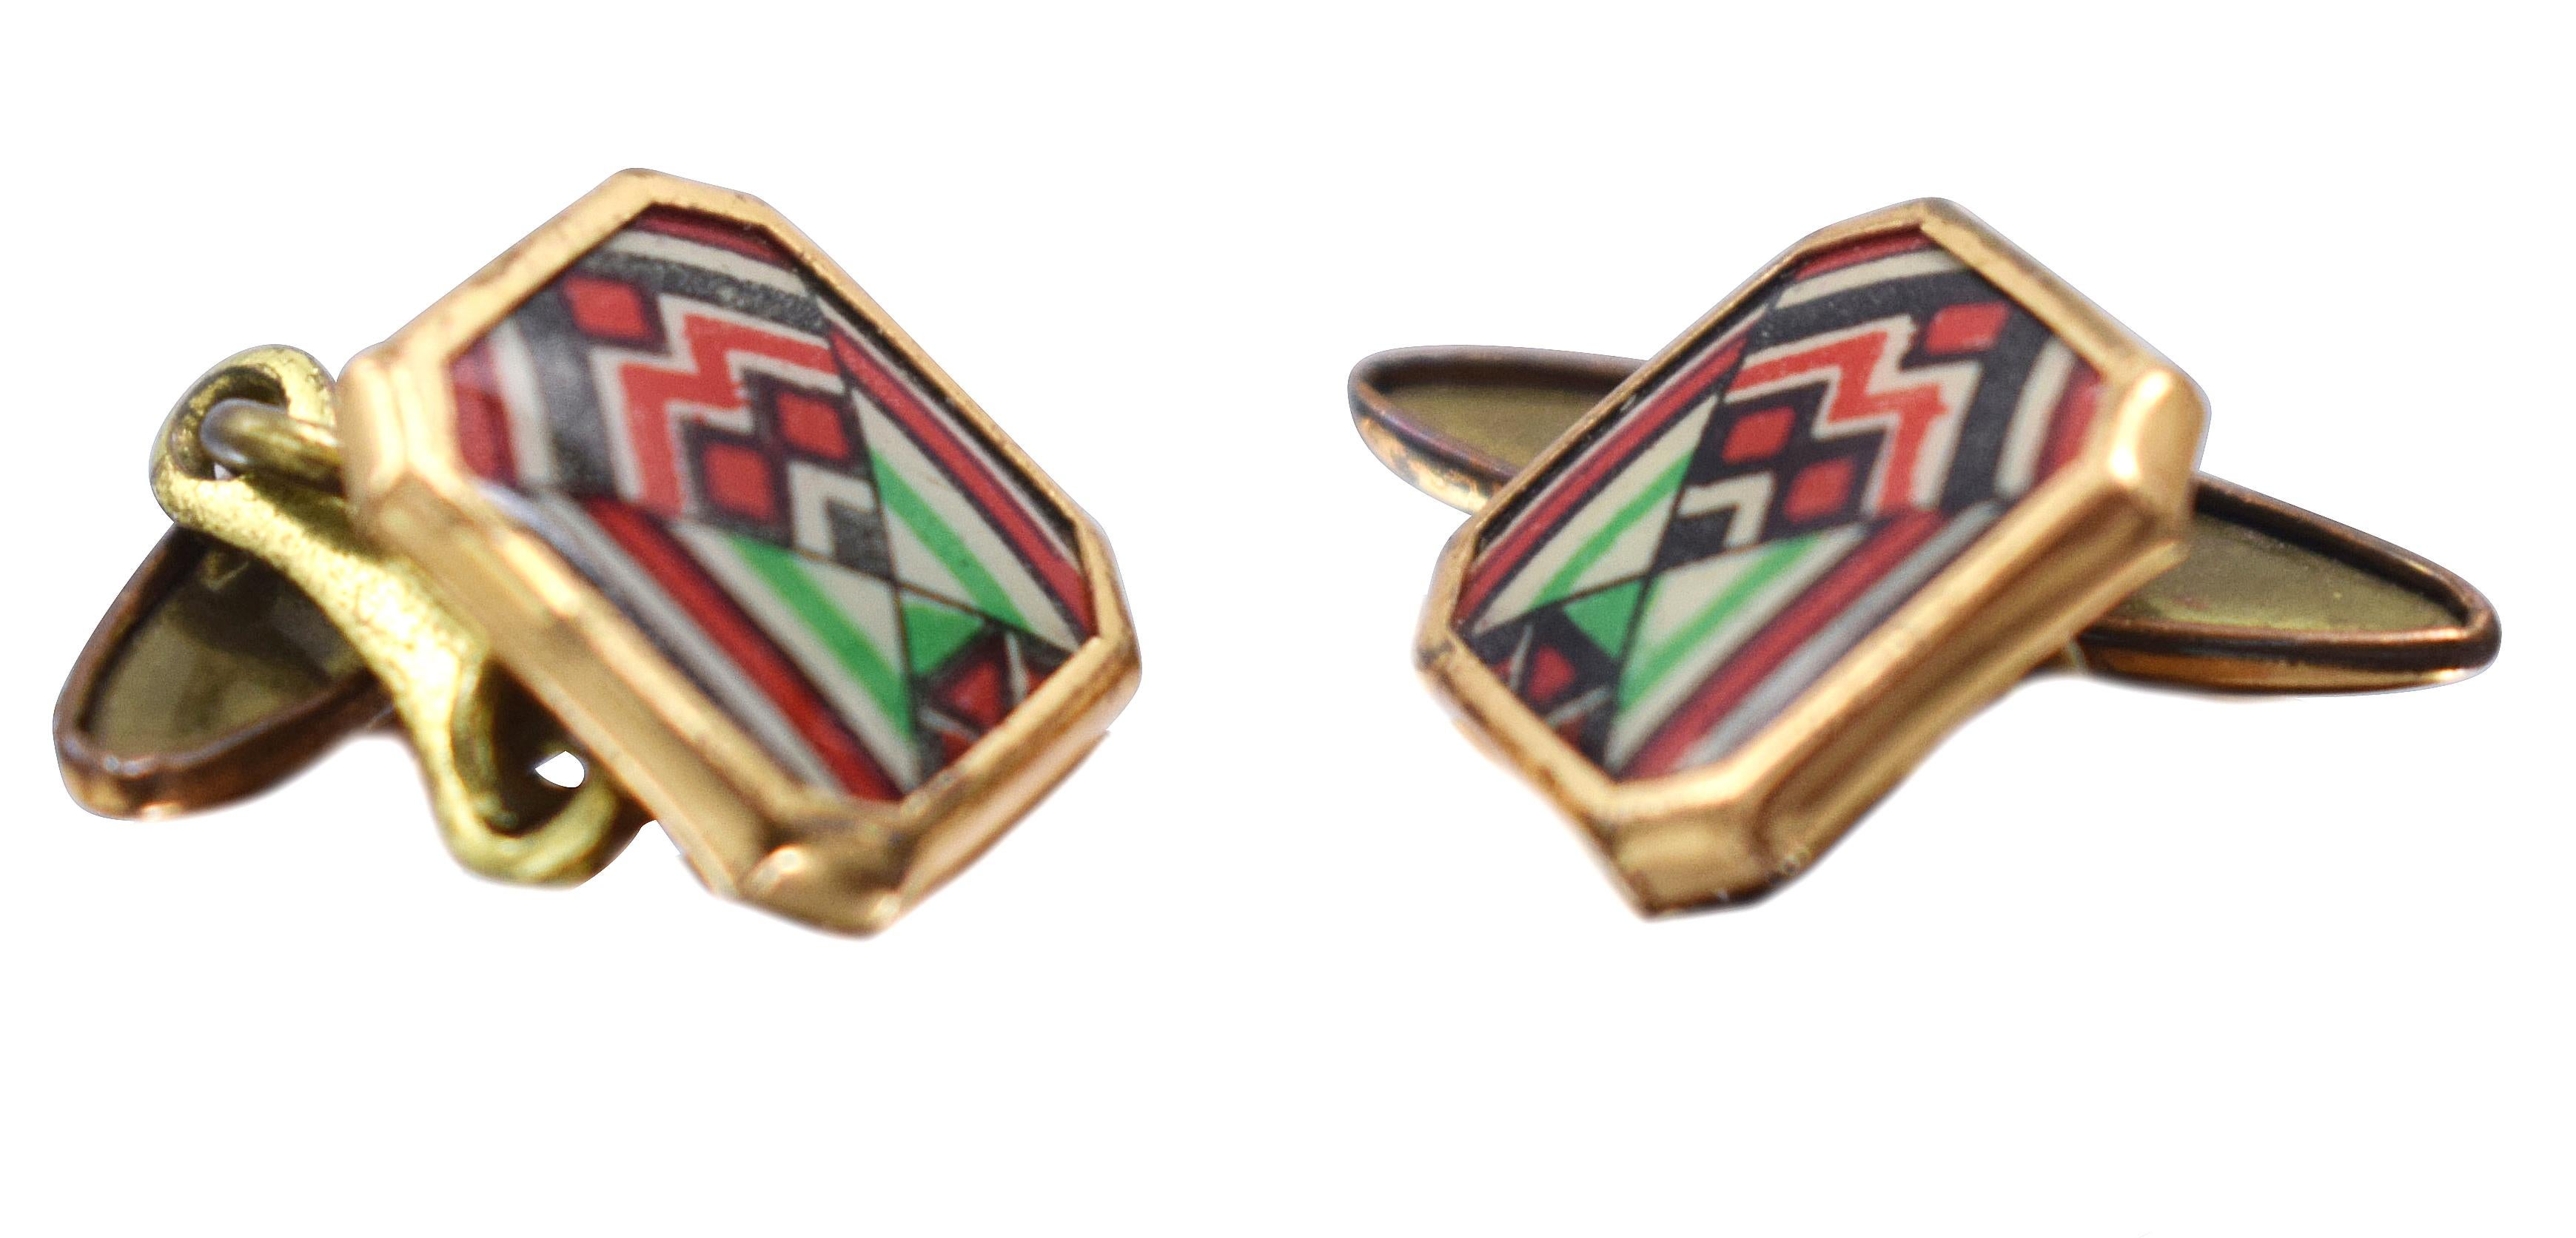 A rare find are these extremely stylish matching pair of English 1930's Art Deco modernist enamel gents cufflinks. Fabulous geometric patterning and colour, such a distinctive look. Condition is very good with only signs of age to the under link